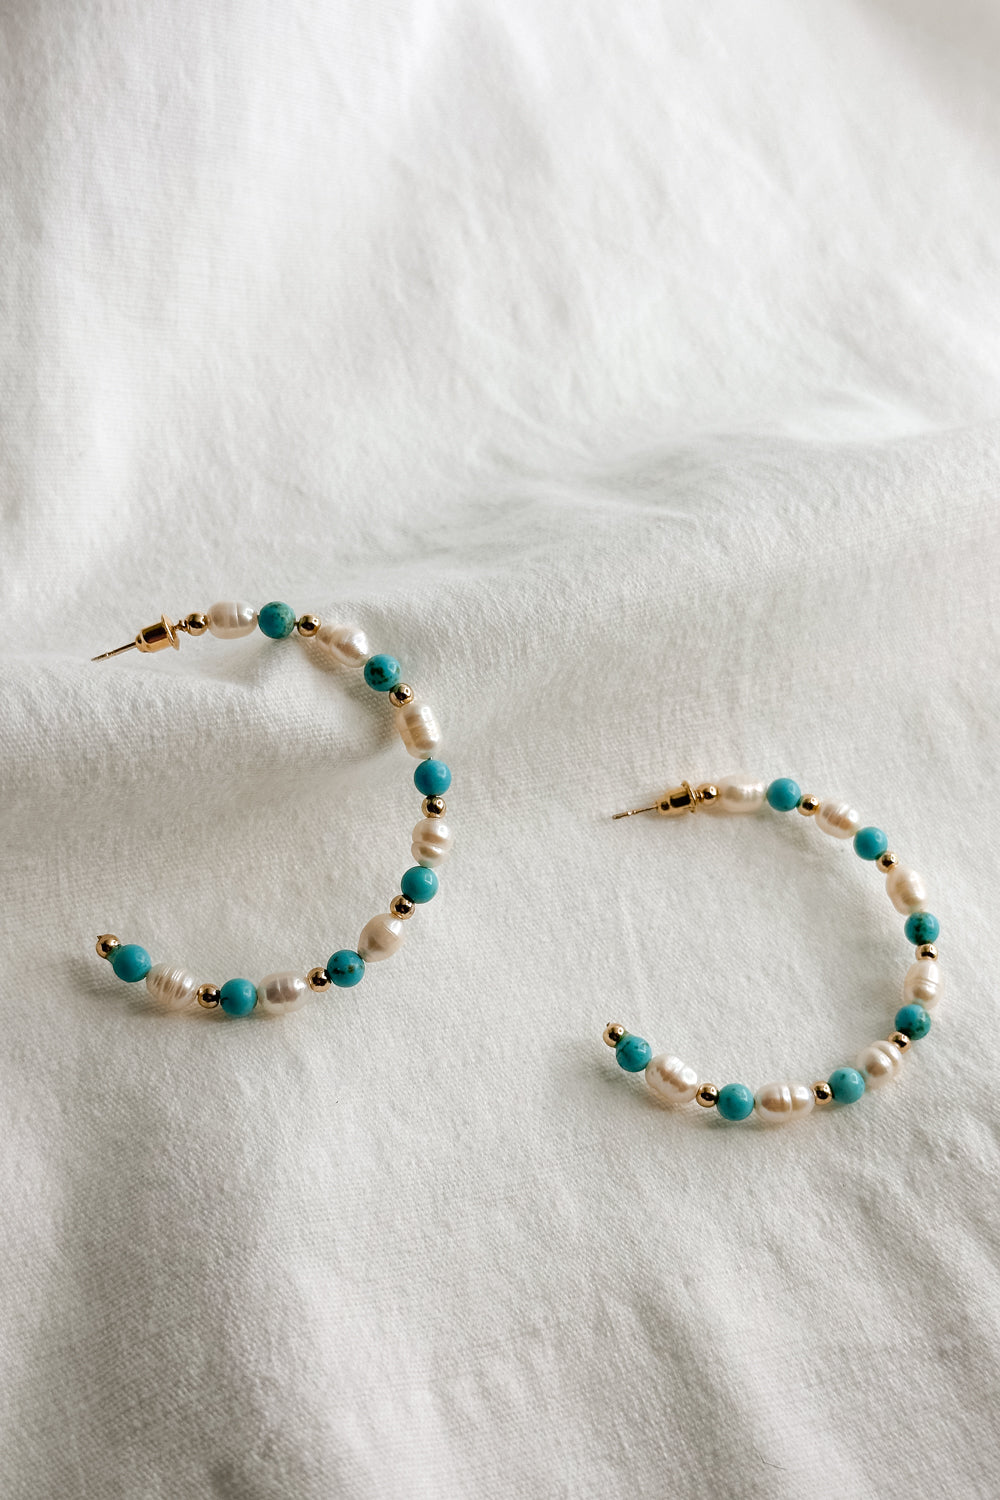 Flat lay view of the Avianna Turquoise & Pearl Hoop Earring which features large, open hoops with gold, turquoise and pearl beads